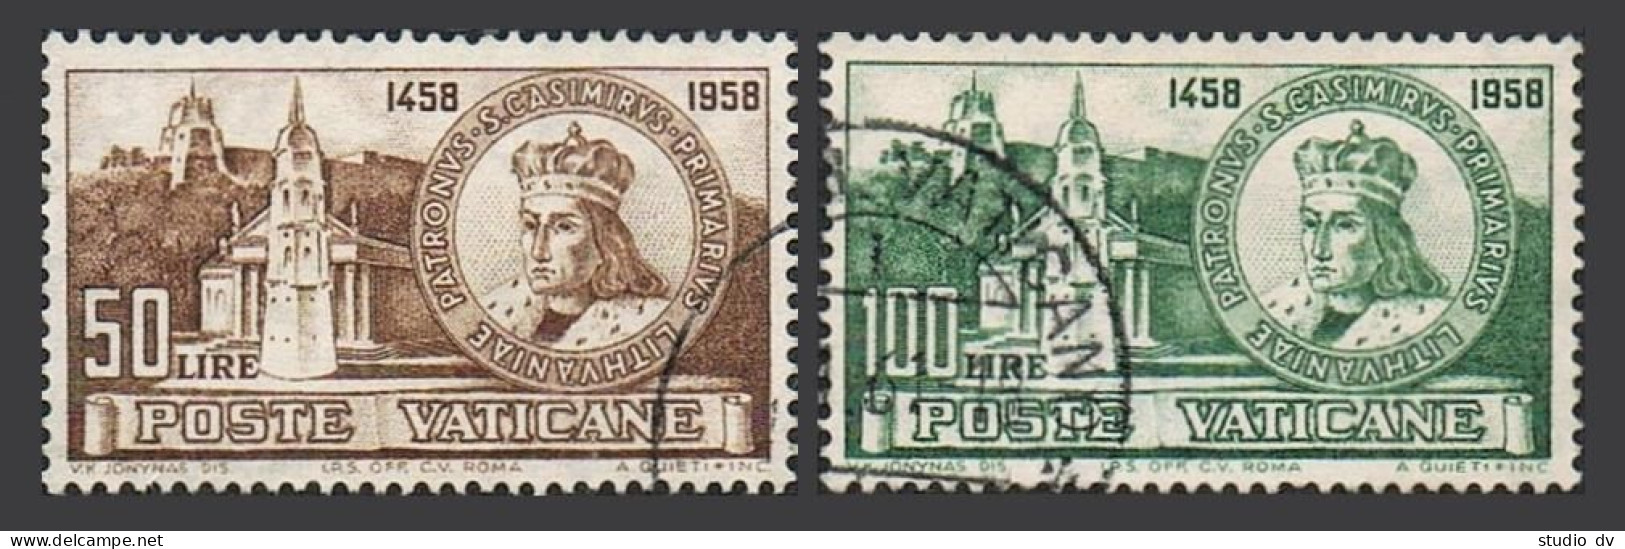 Vatican 264-265, Used. Michel 330-331. St Casimir, Patron Saint Of Lithuania, 1959 - Used Stamps